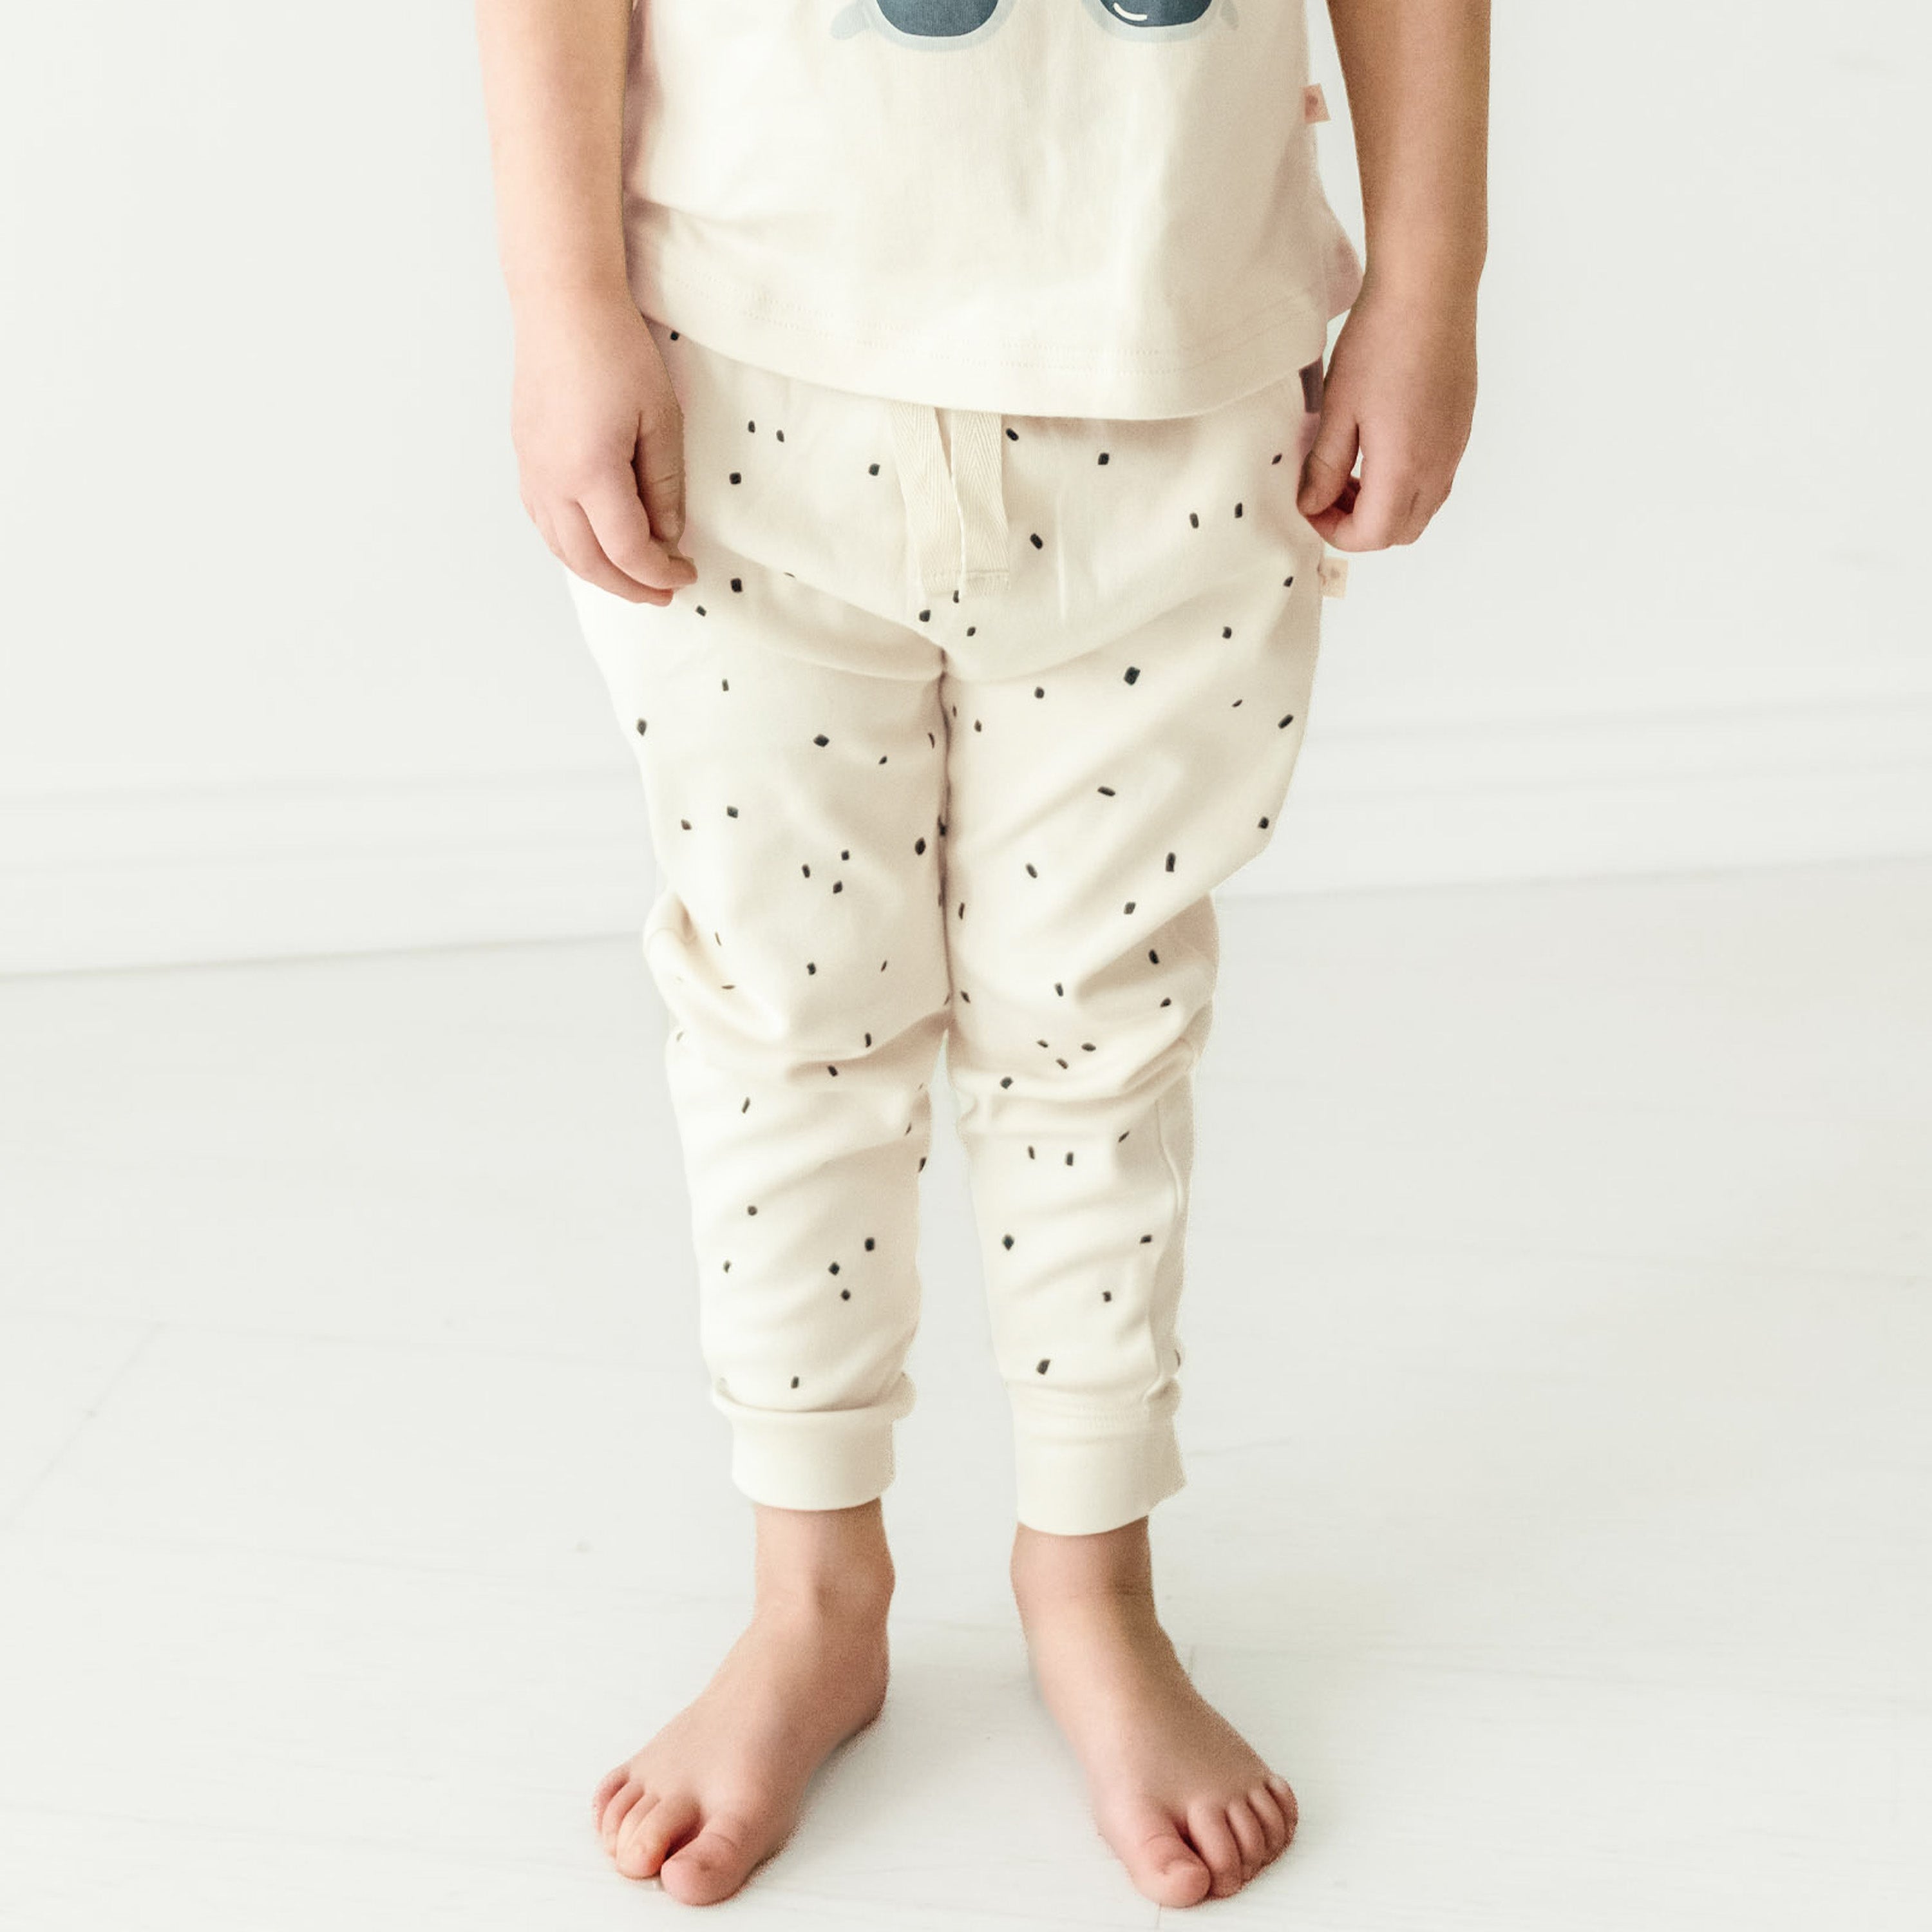 A young toddler standing barefoot, wearing a light-colored shirt with an owl design and Organic Harem Pants in Pixie Dots by Makemake Organics. The background is a clean, white floor and wall.